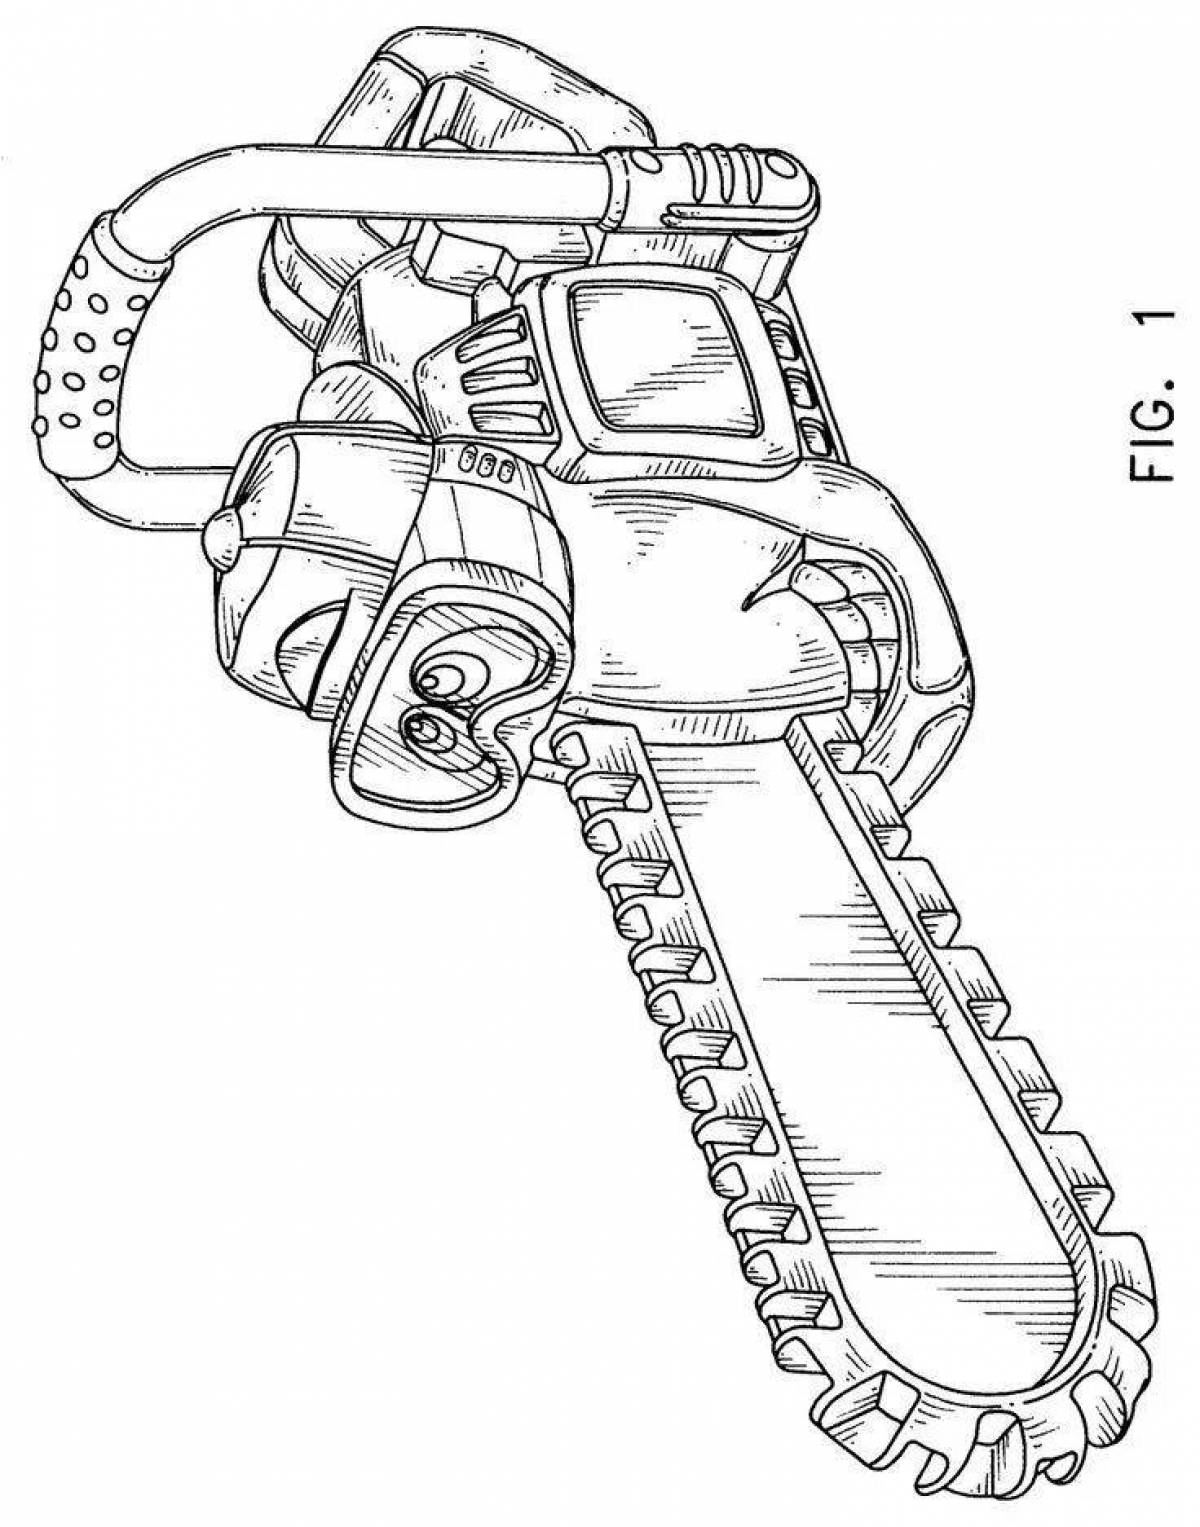 Luminous power man chainsaw coloring page